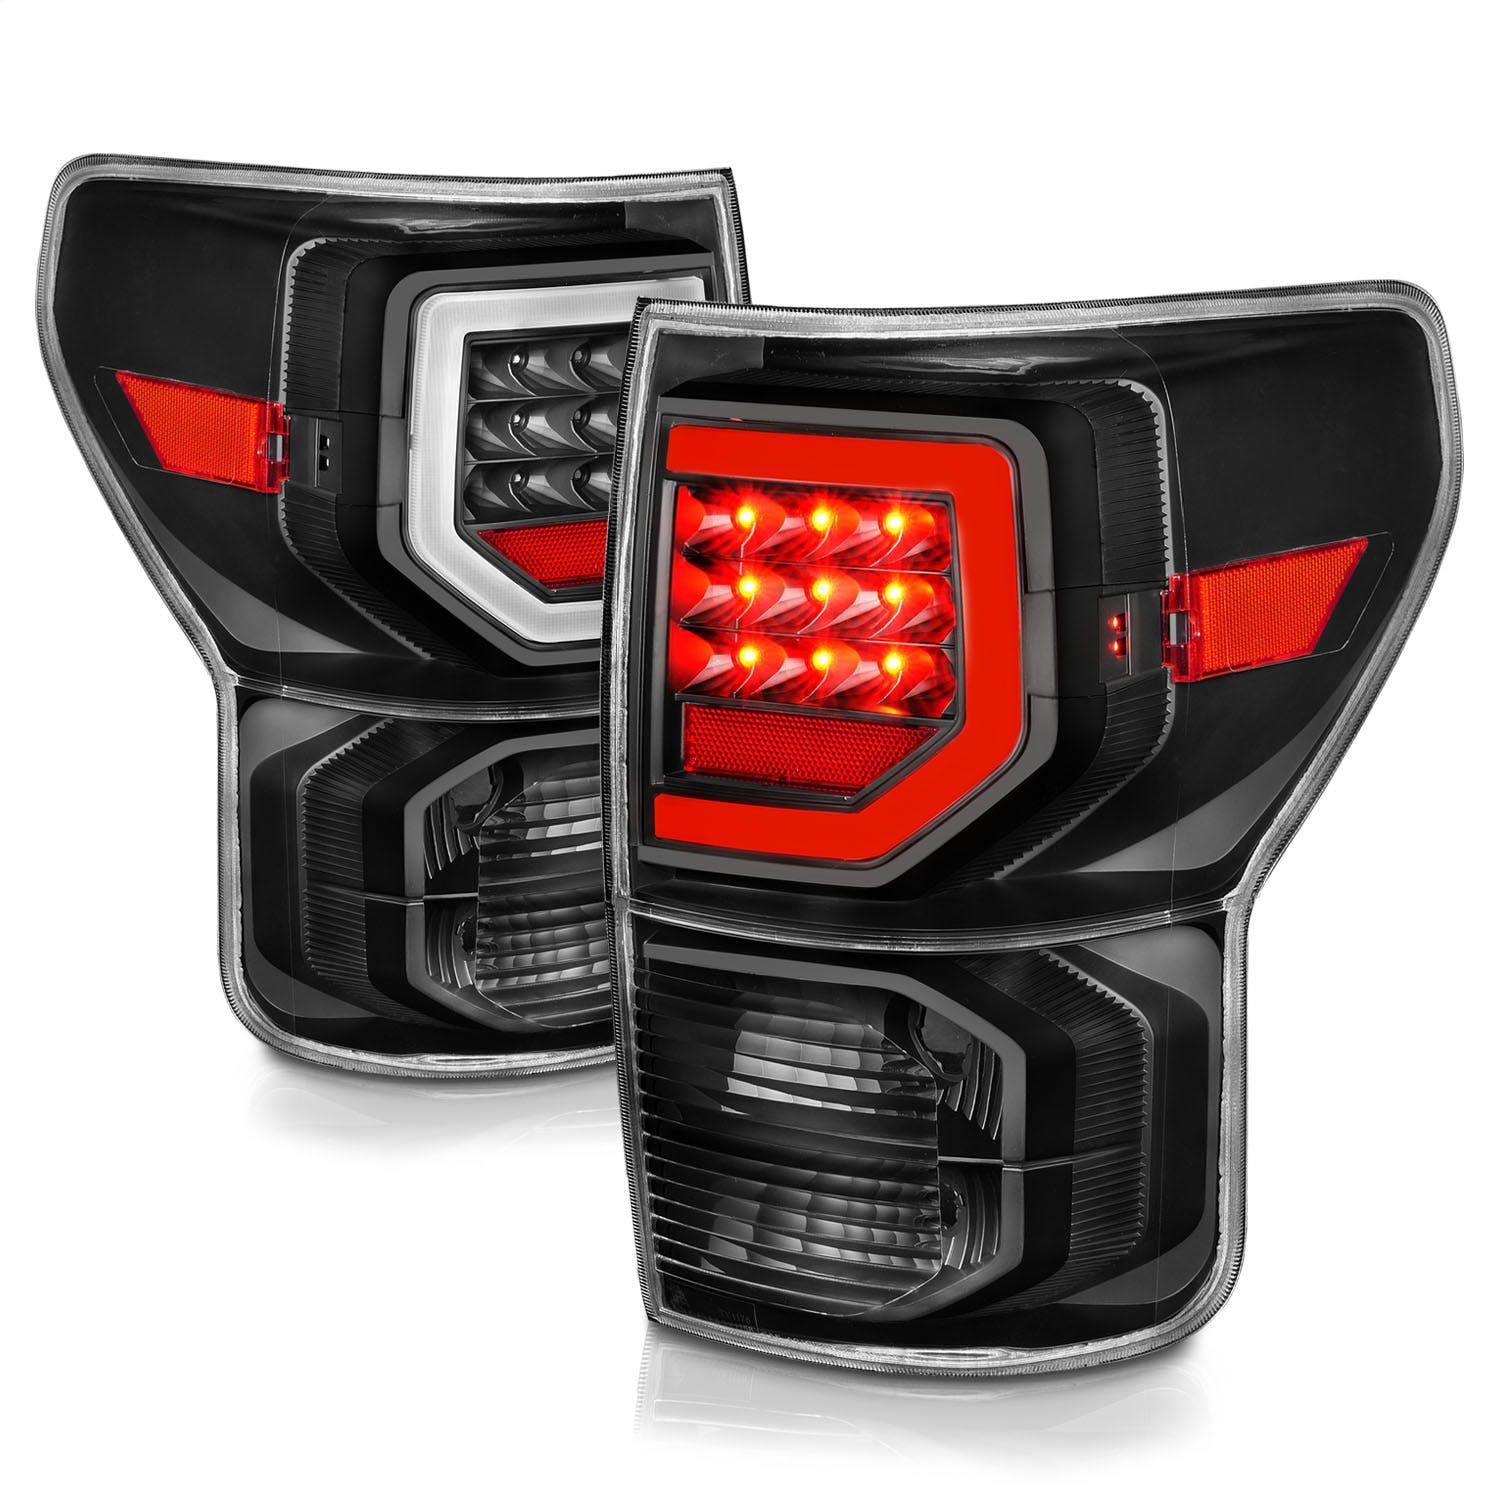 AnzoUSA 311386 Full LED Tail Lights with Light Bars Black Housing Clear Lens